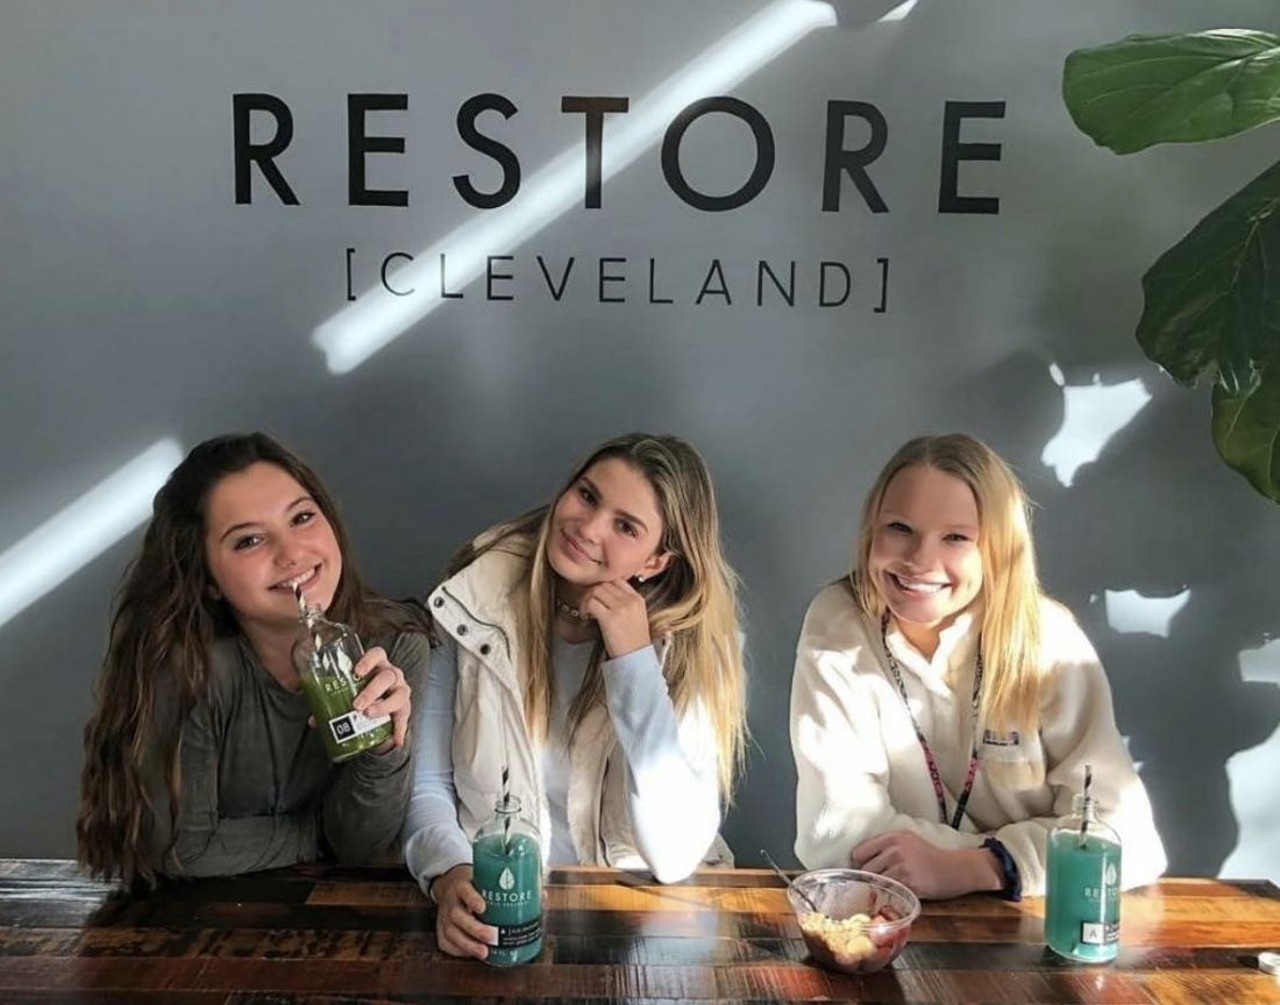  Restore Cold Pressed
1001 Huron Rd., Cleveland 
For a fresh juice, smoothie or toast, Restore Cold Pressed is the place to go. Try an acai bowl ($10) for something different, healthy and delicious.
Photo via @RestoreColdPressed